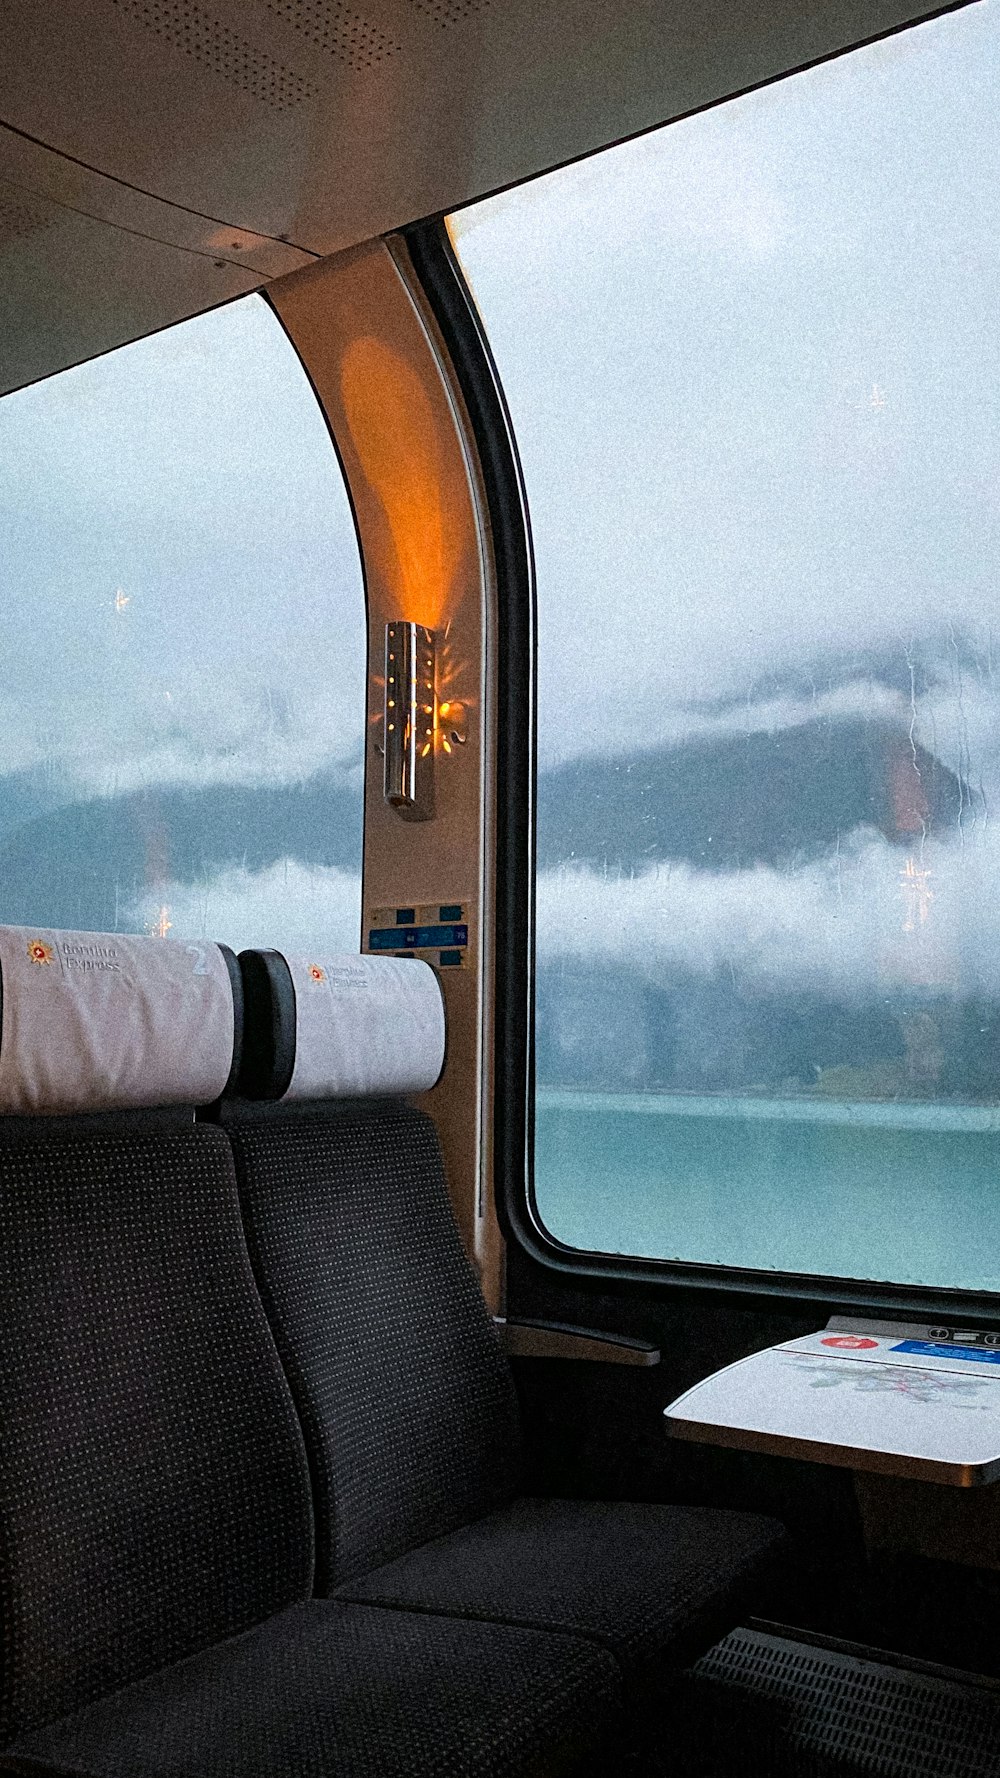 a train car with a view of a body of water